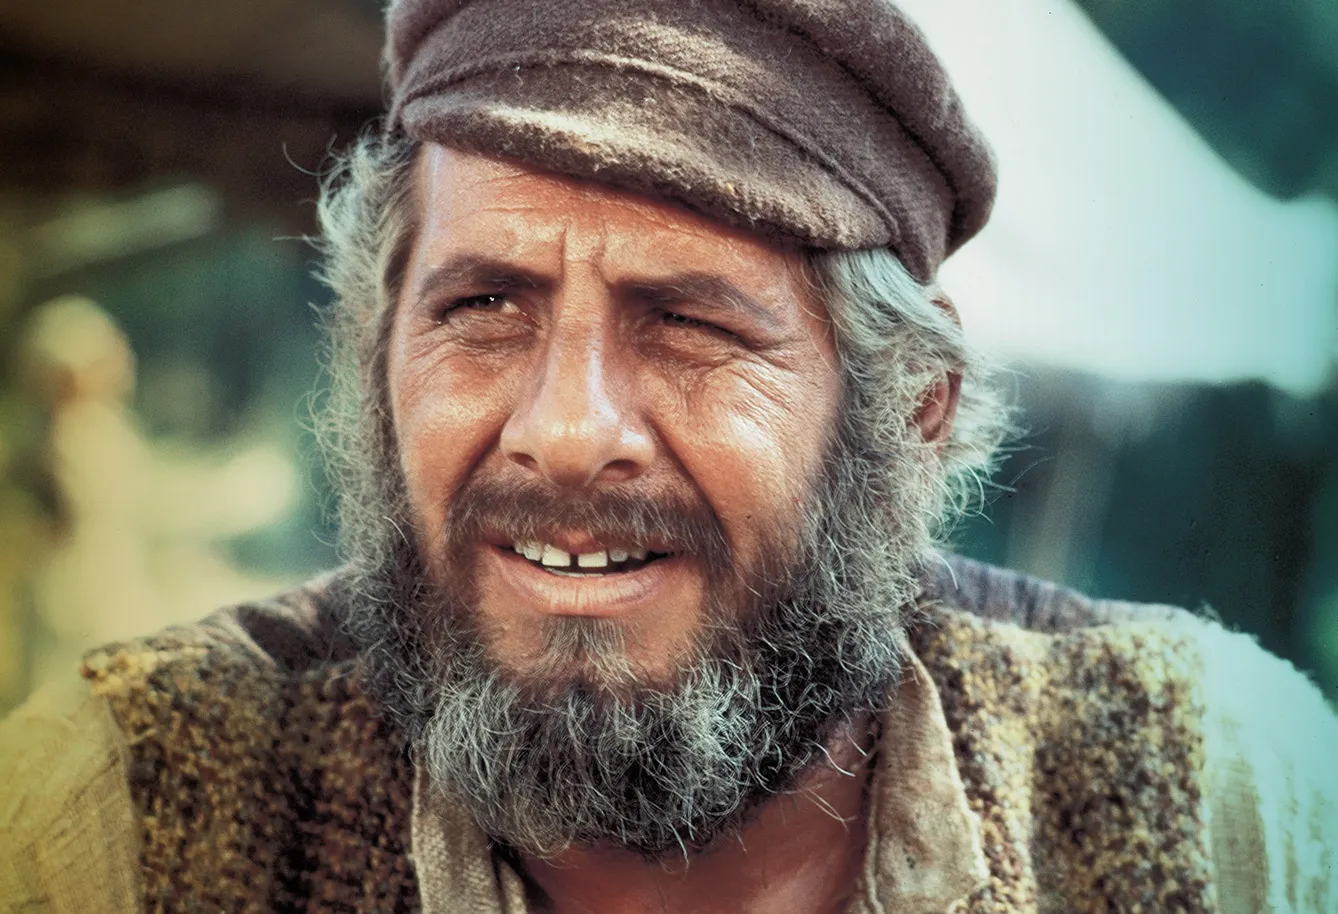 1971 - Fiddler On The Roof - Movie Set, pictured Chaim Topol as Tewje